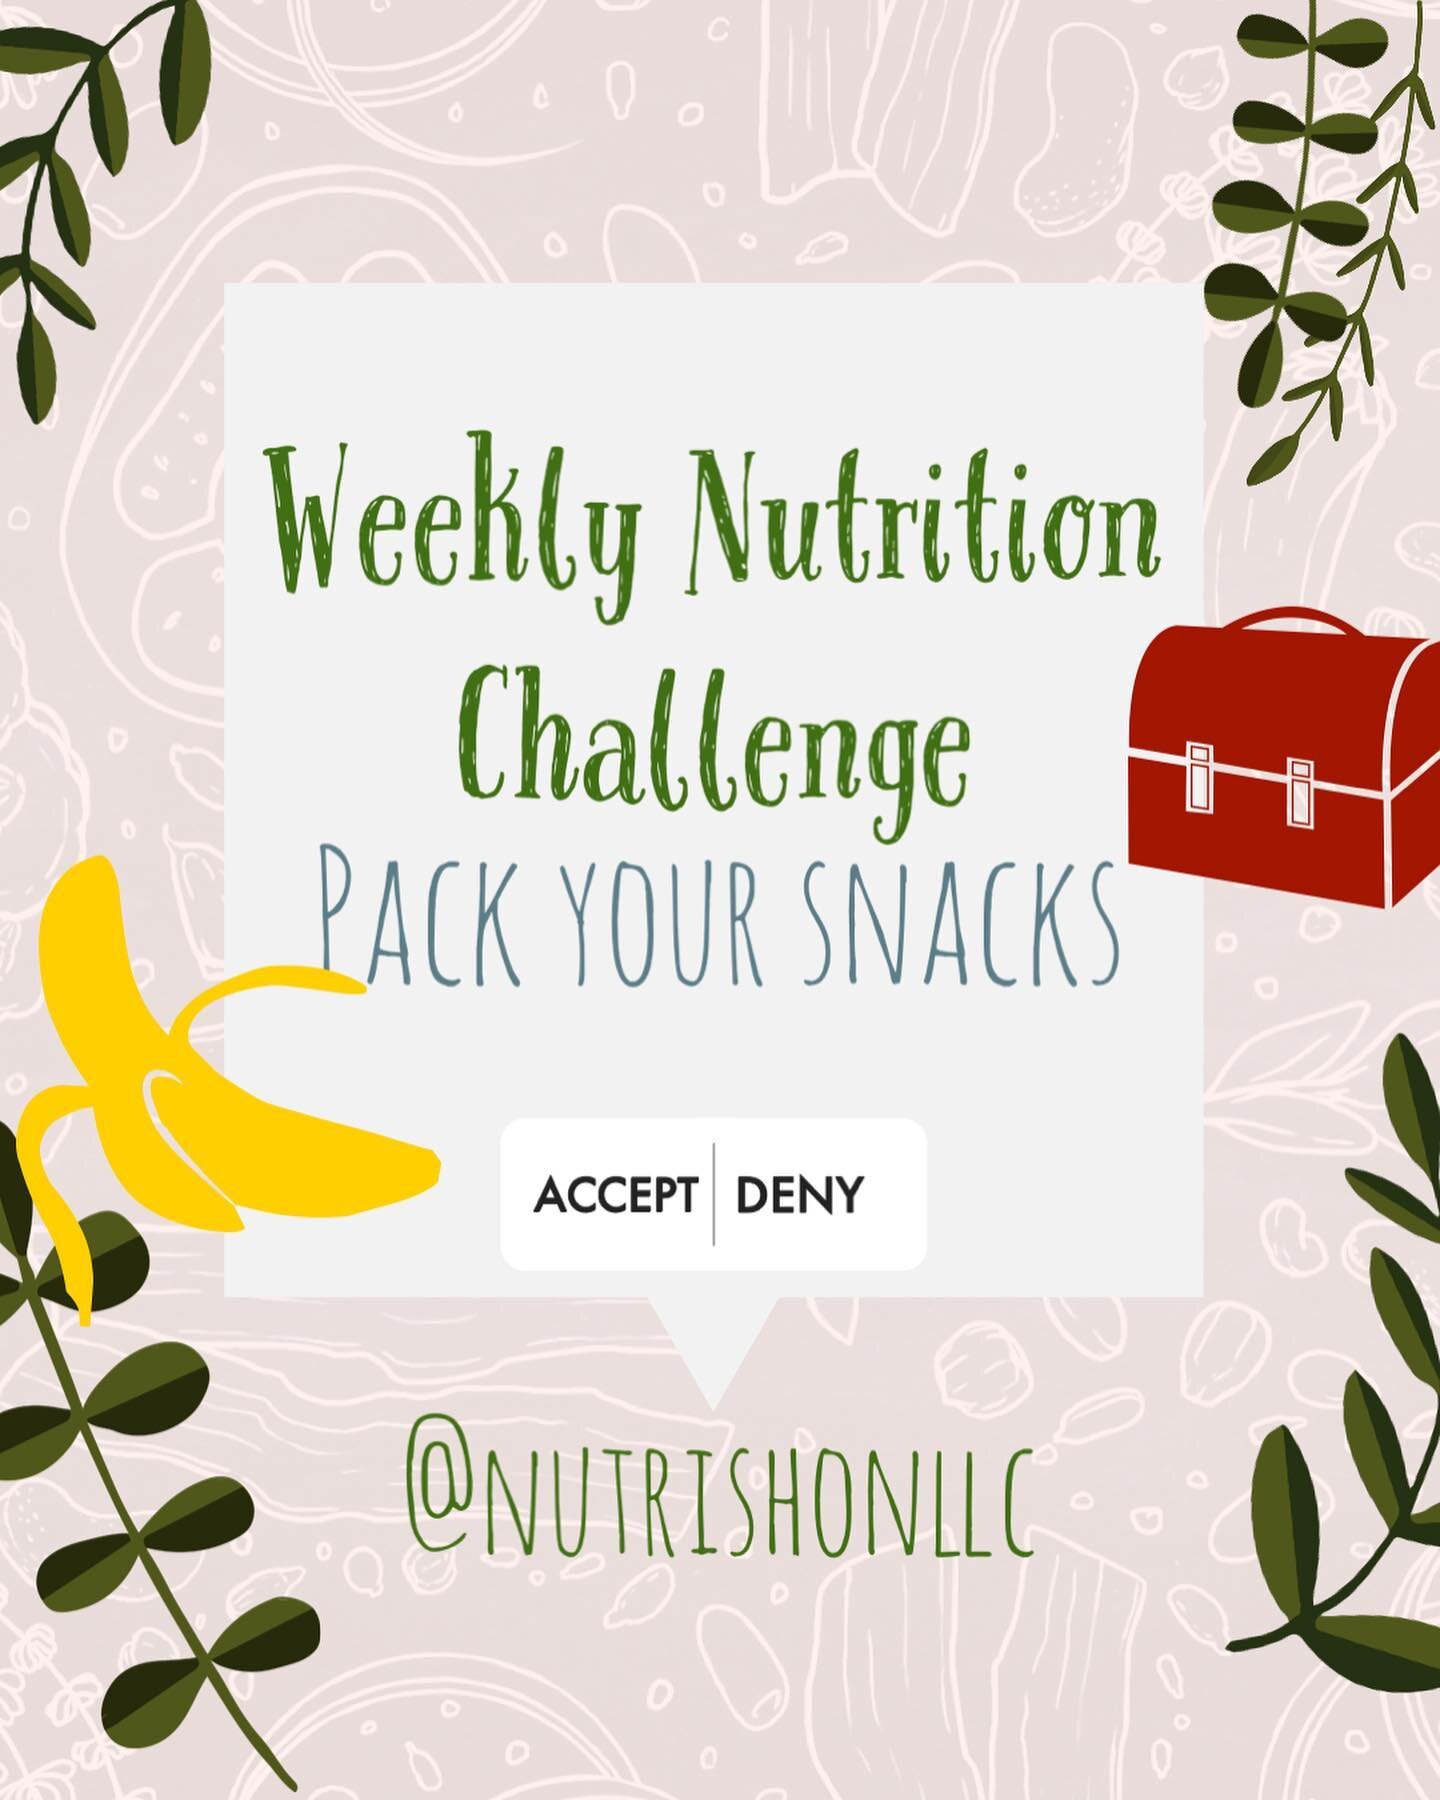 &ldquo;❤️&rdquo; this post to accept the challenge!

Add more energy and nutrients to your day by having healthy snacks between meals. 

When it comes to picking snacks, try pairing a protein and source of dietary fiber for extra energy and fullness 